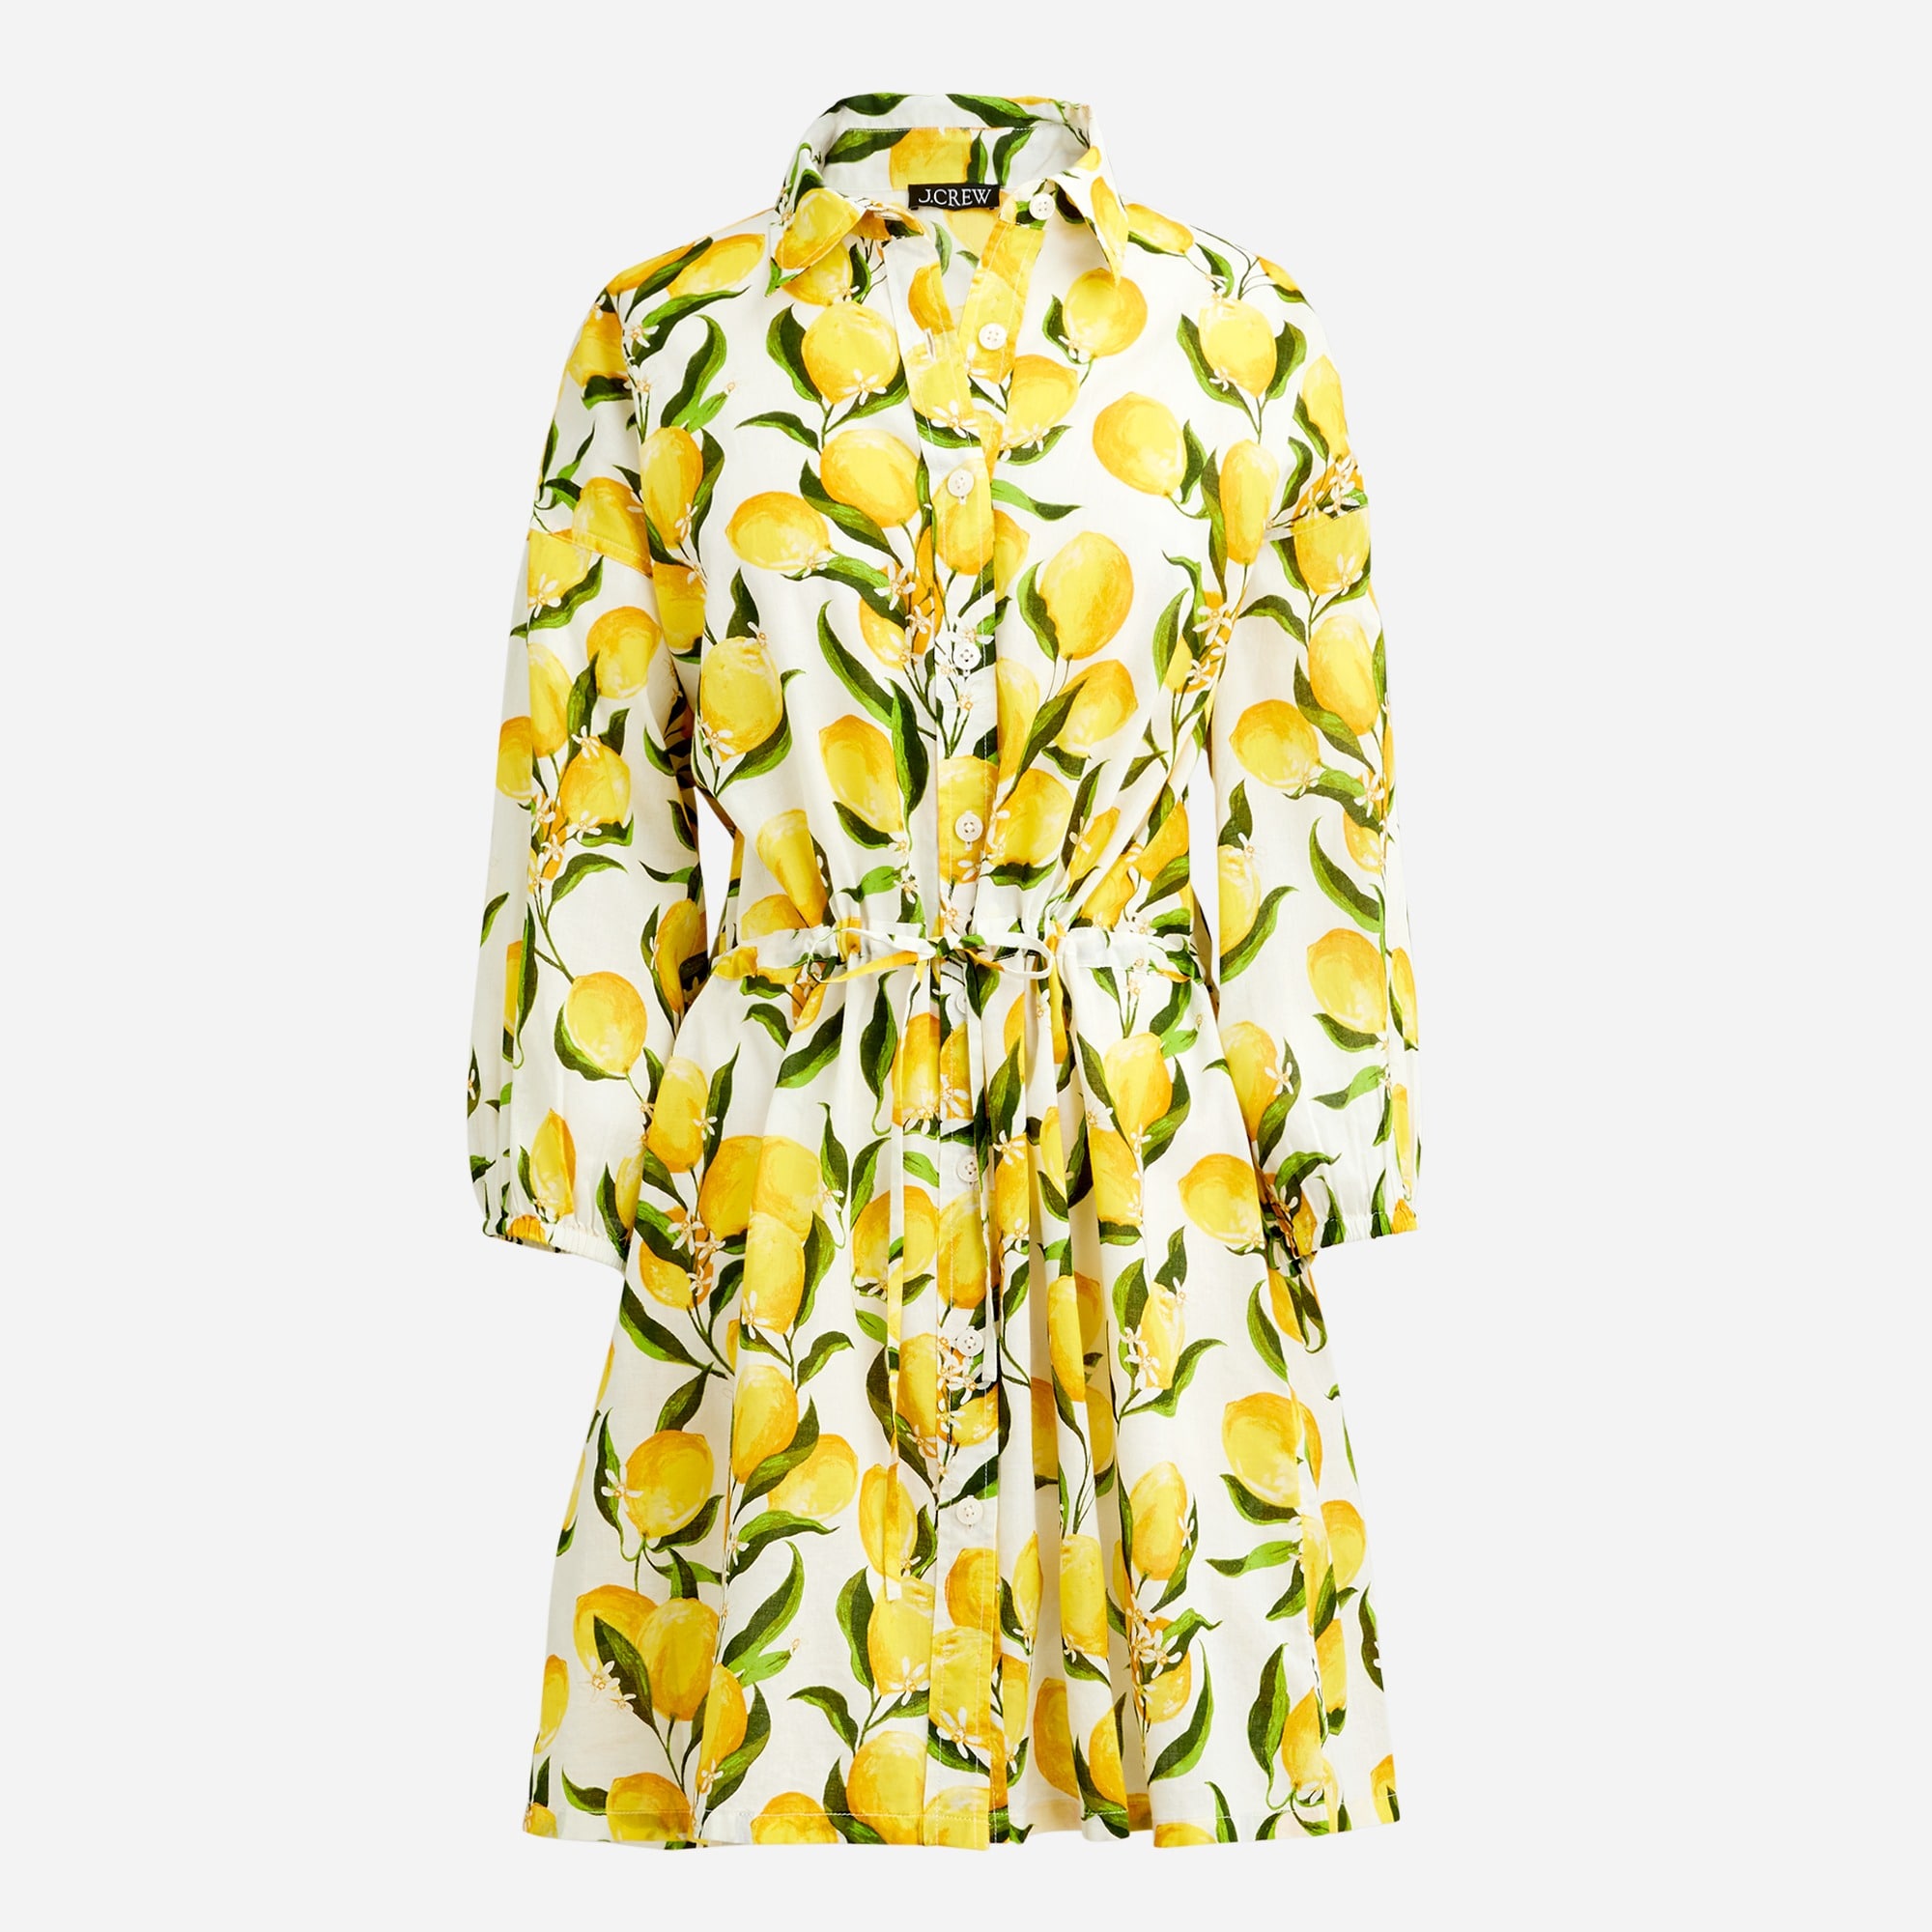  Cinched shirtdress in limoncello cotton voile